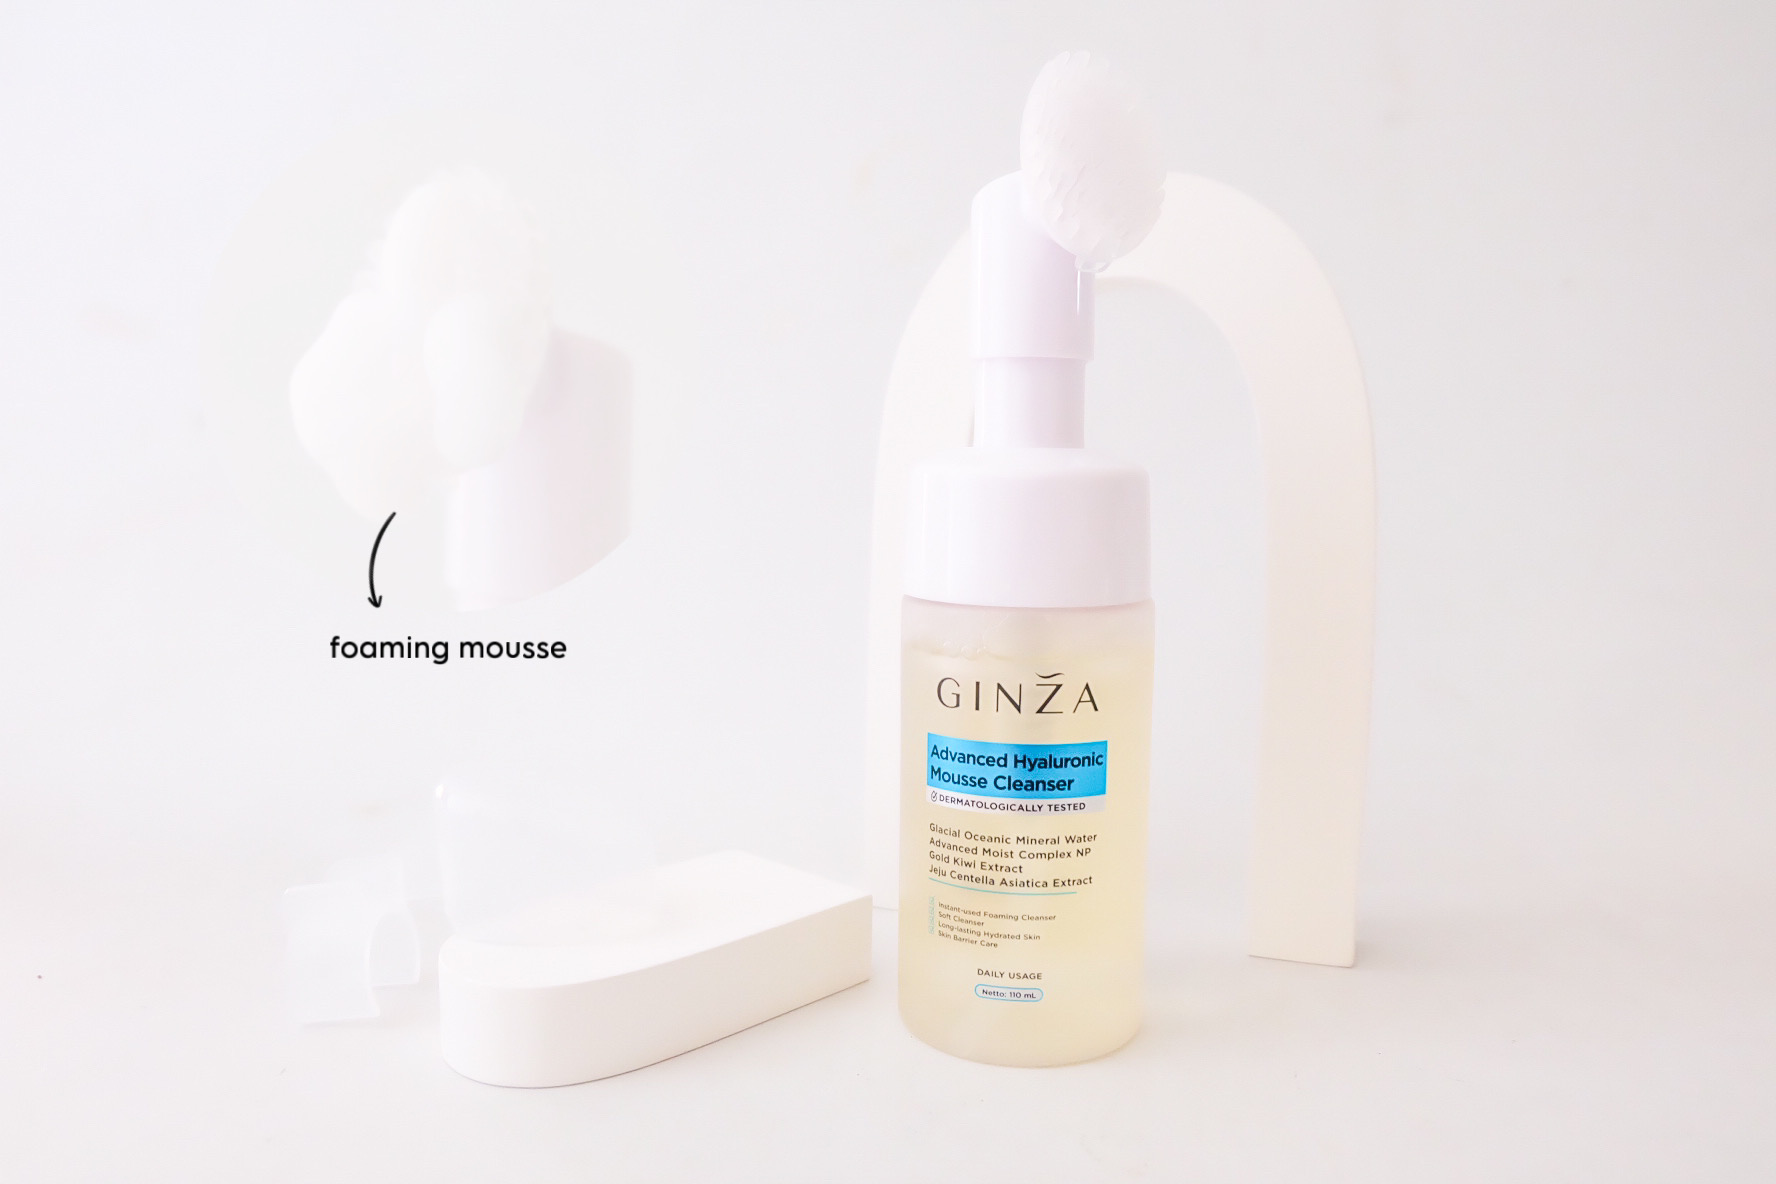 [Review] Ginza Advanced Hyaluronic Mousse Cleanser